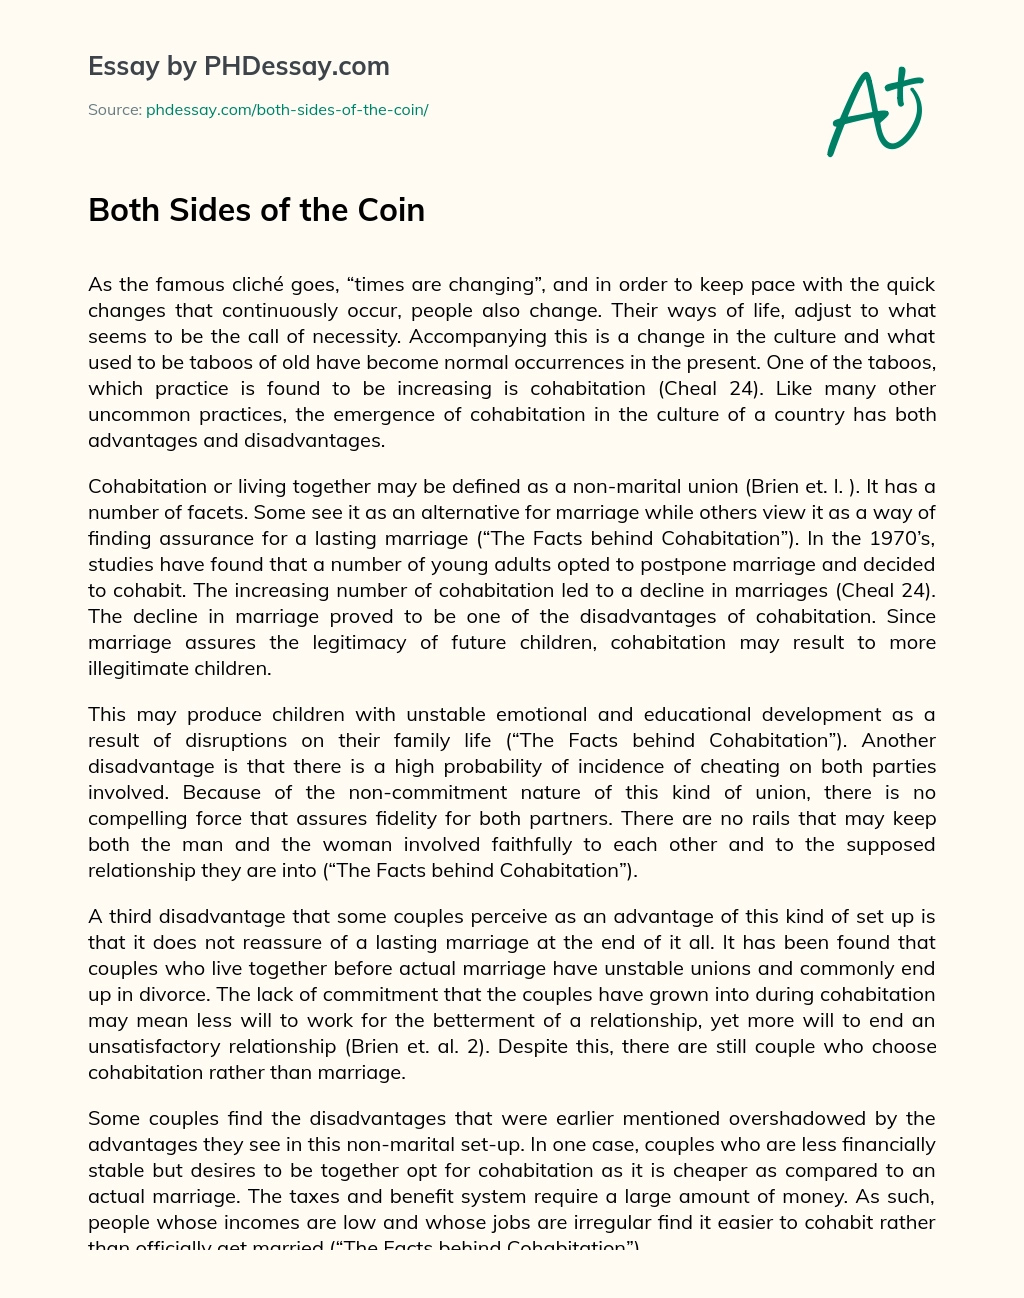 Both Sides of the Coin essay